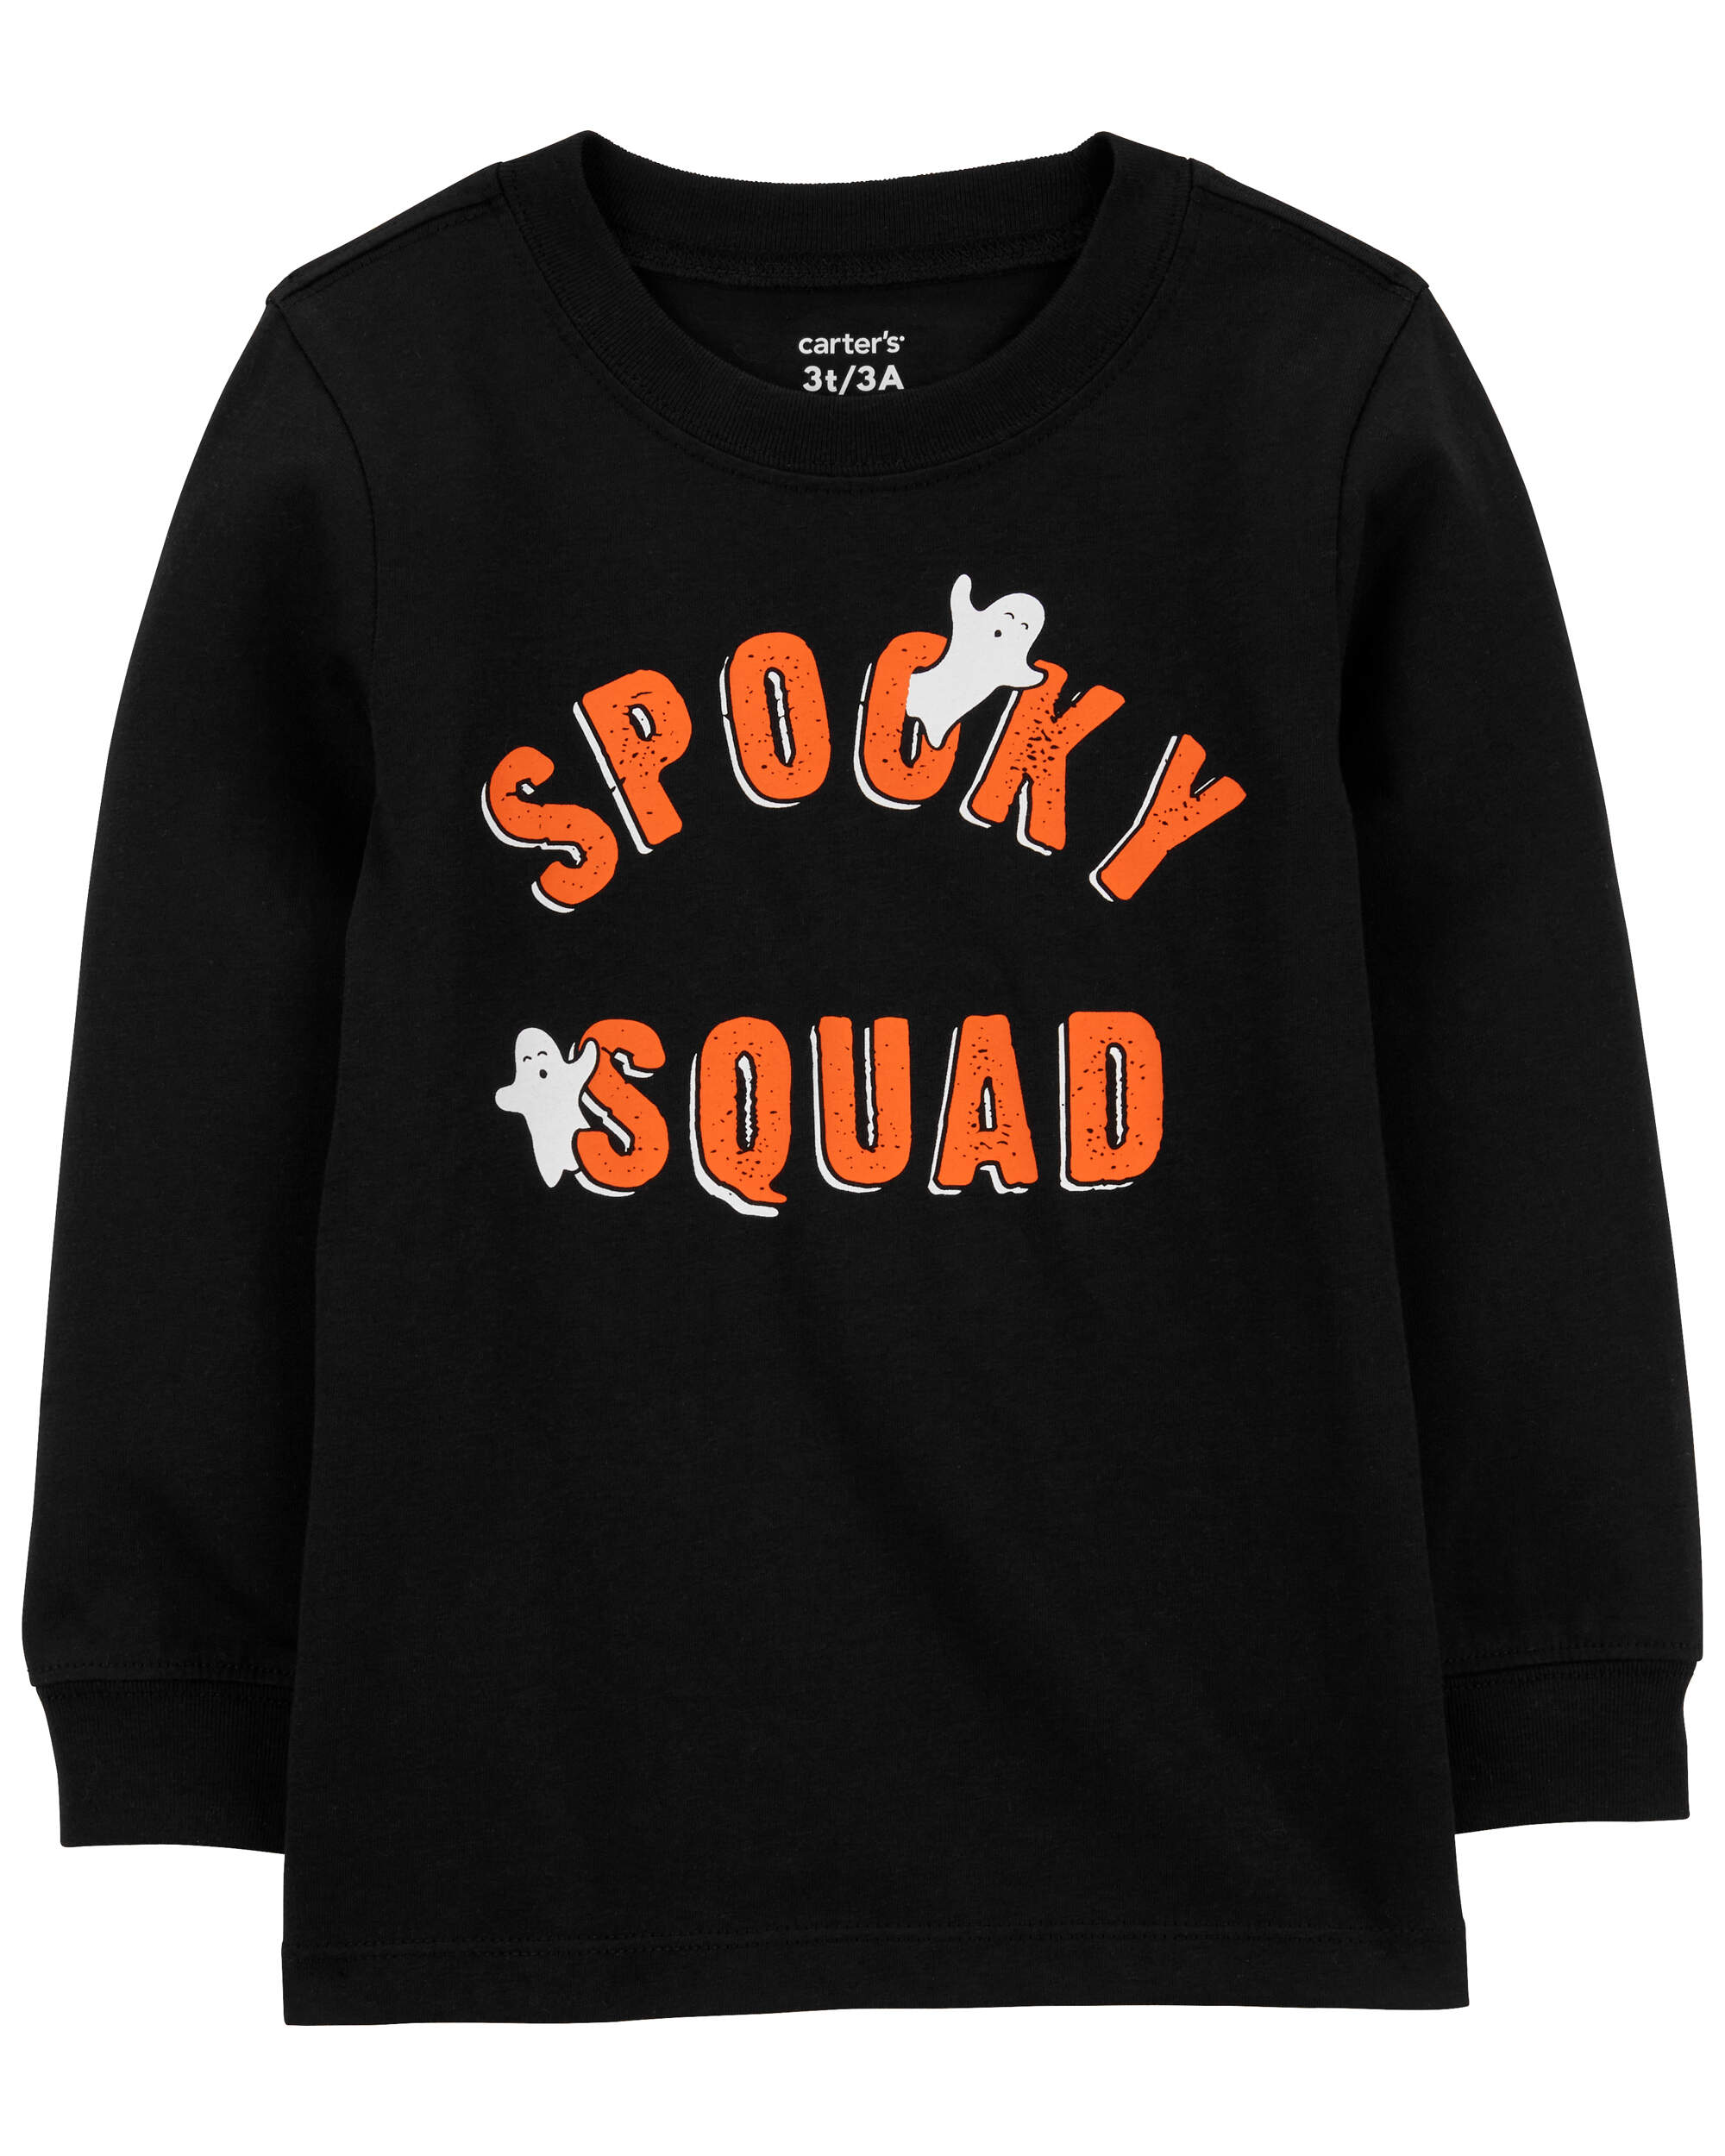 Toddler Halloween Spooky Squad Graphic Tee